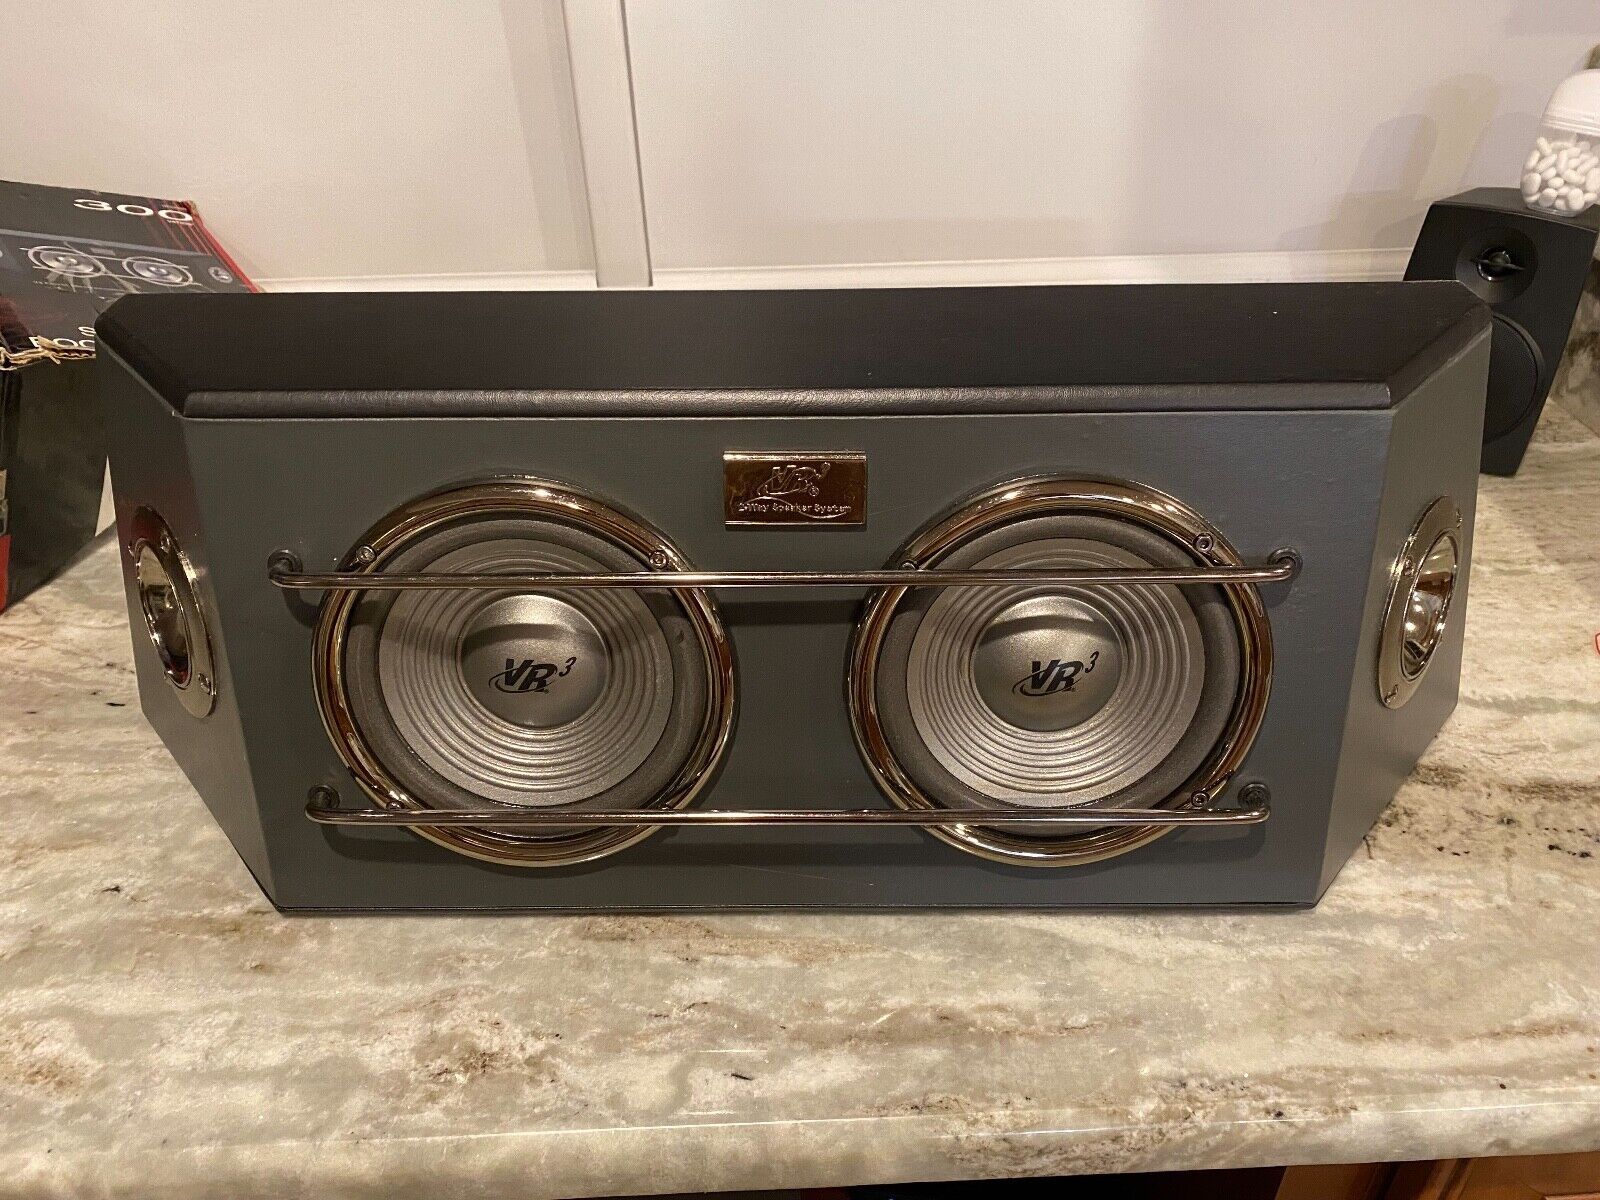 Vintage Stereo System With Speakers And Microphones